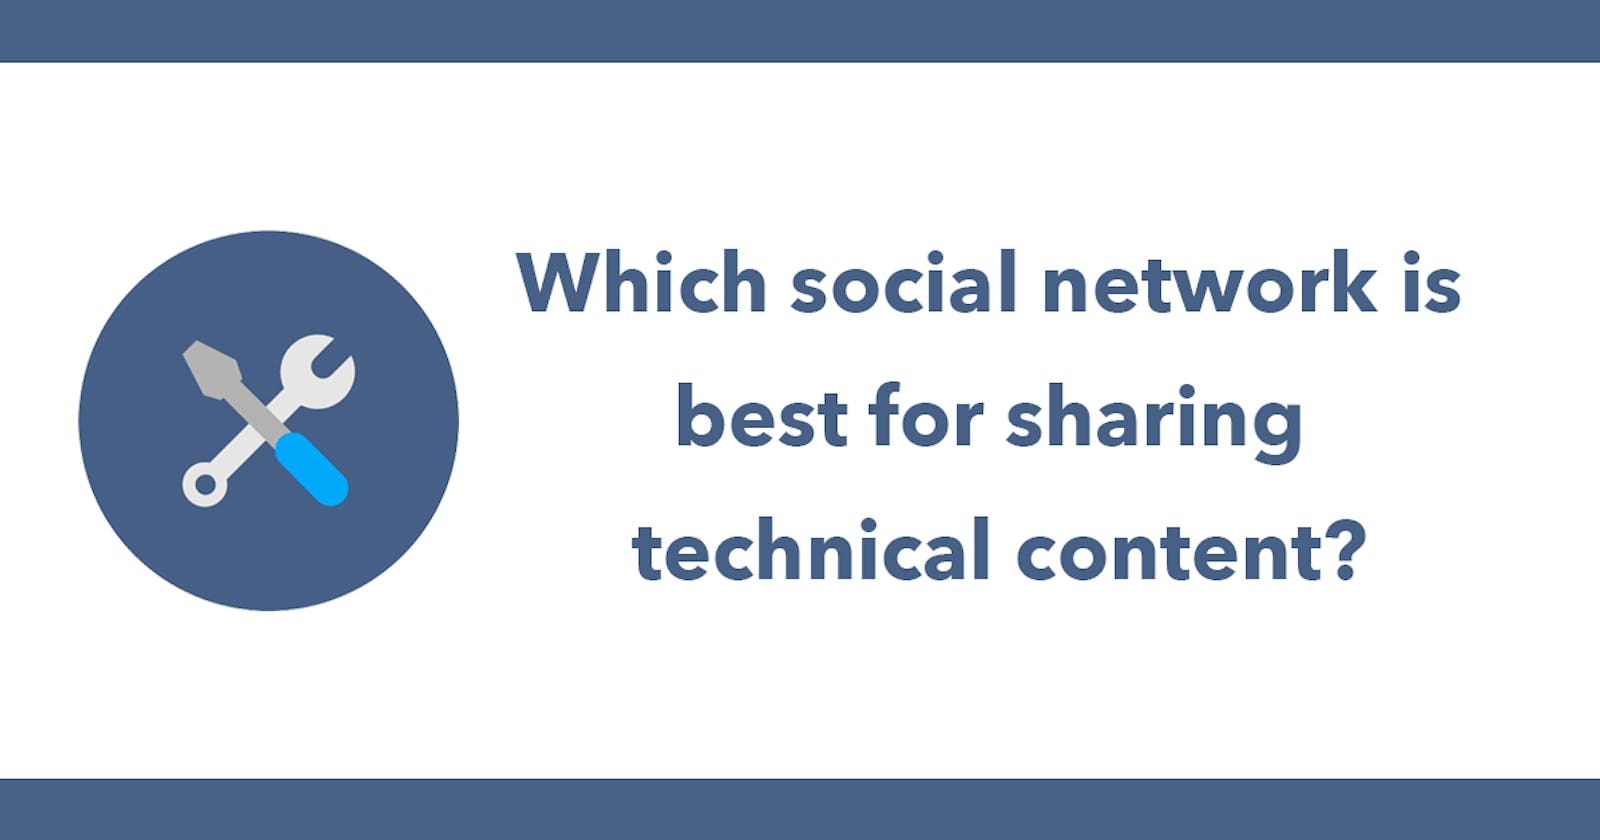 Which social network is best for sharing technical content?